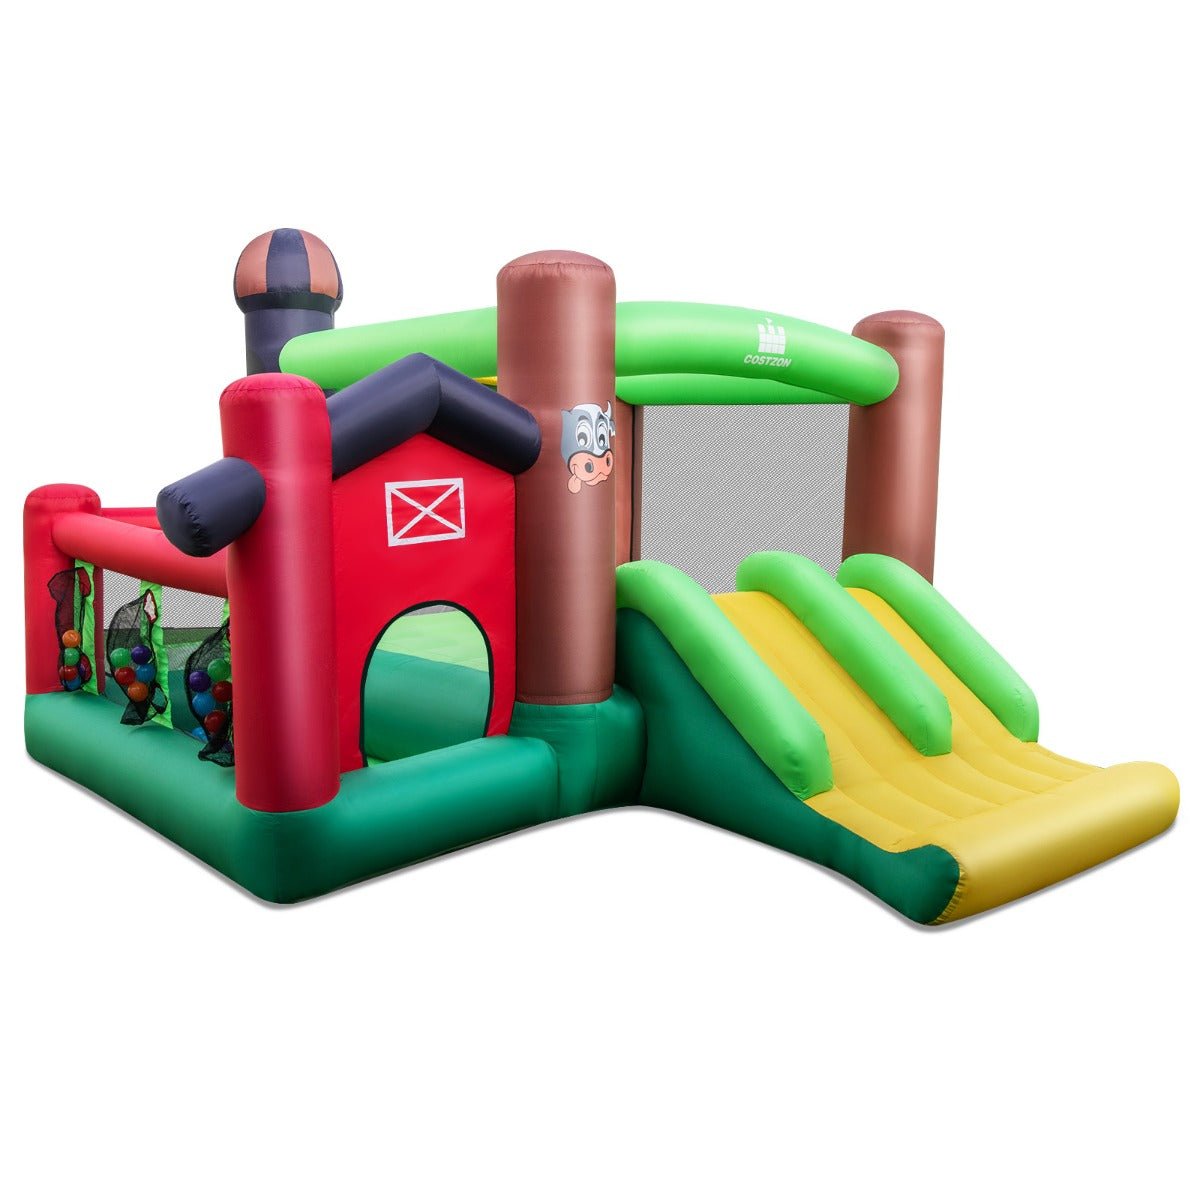 Outdoor Inflatable Bounce Castle - Double Slides for Kids Active Play